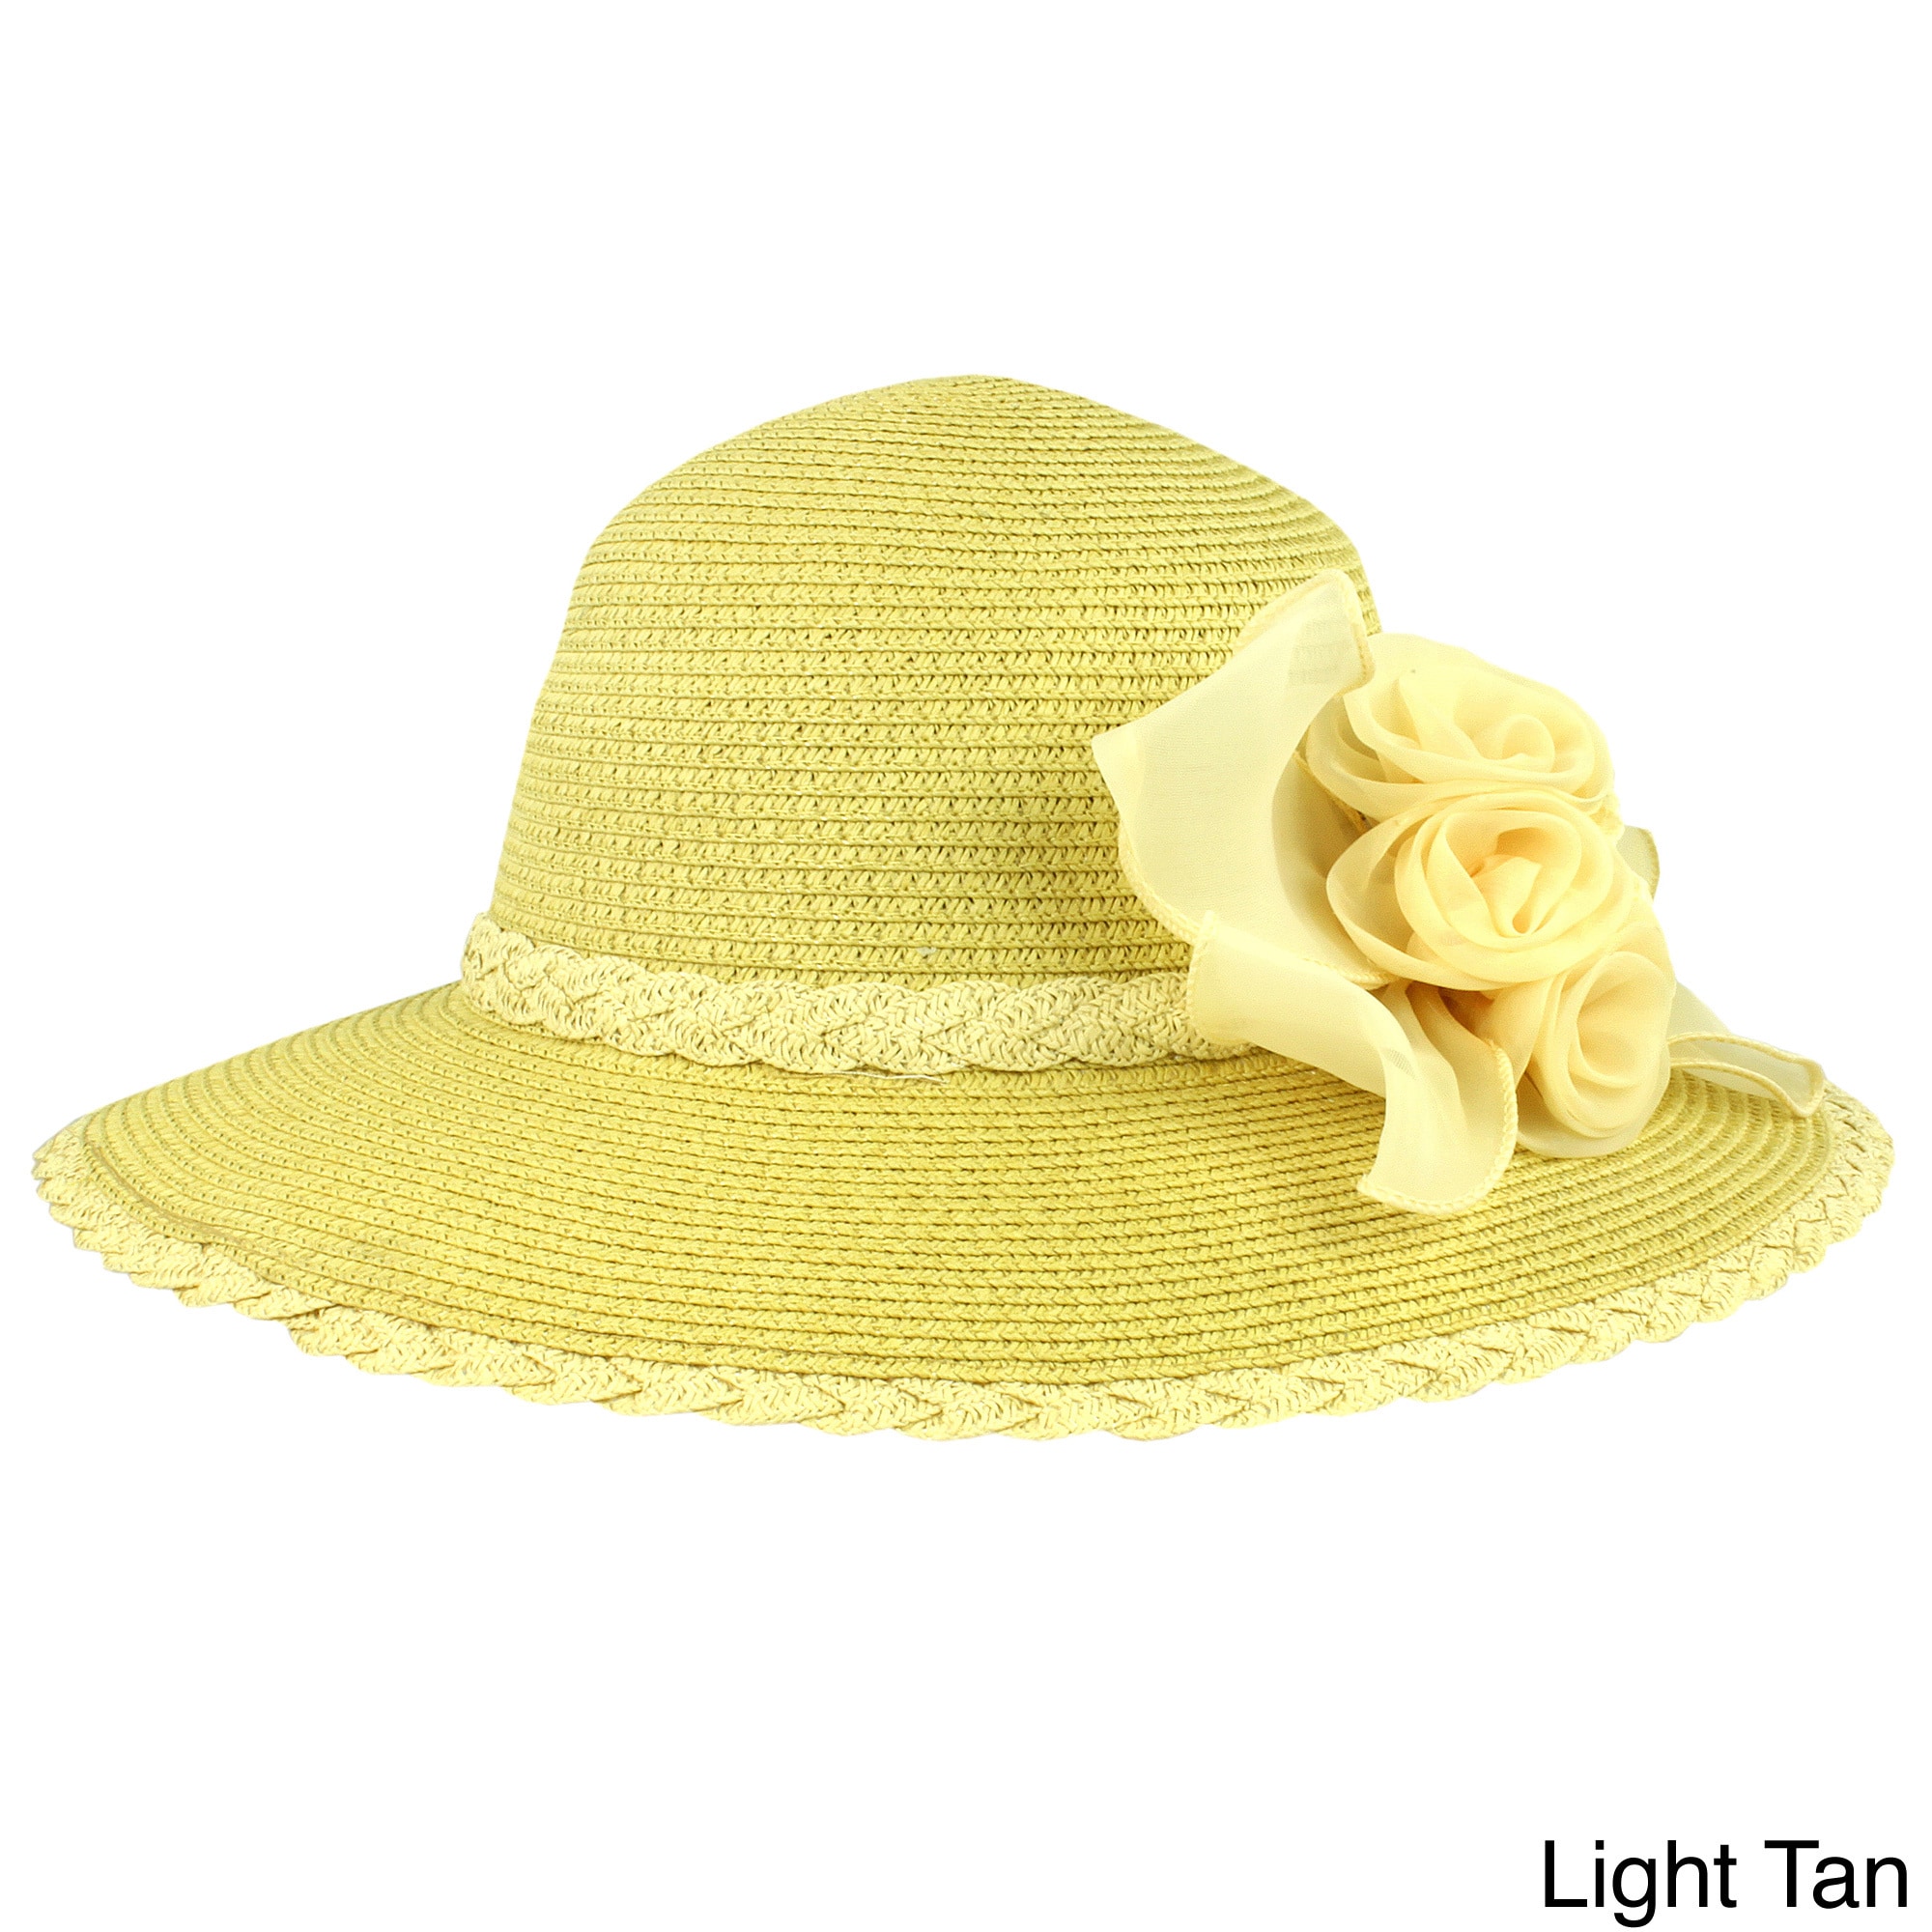 Faddism Faddism Stylish Women Summer Straw Hat With Removable Floral Ornament Tan Size One Size Fits Most